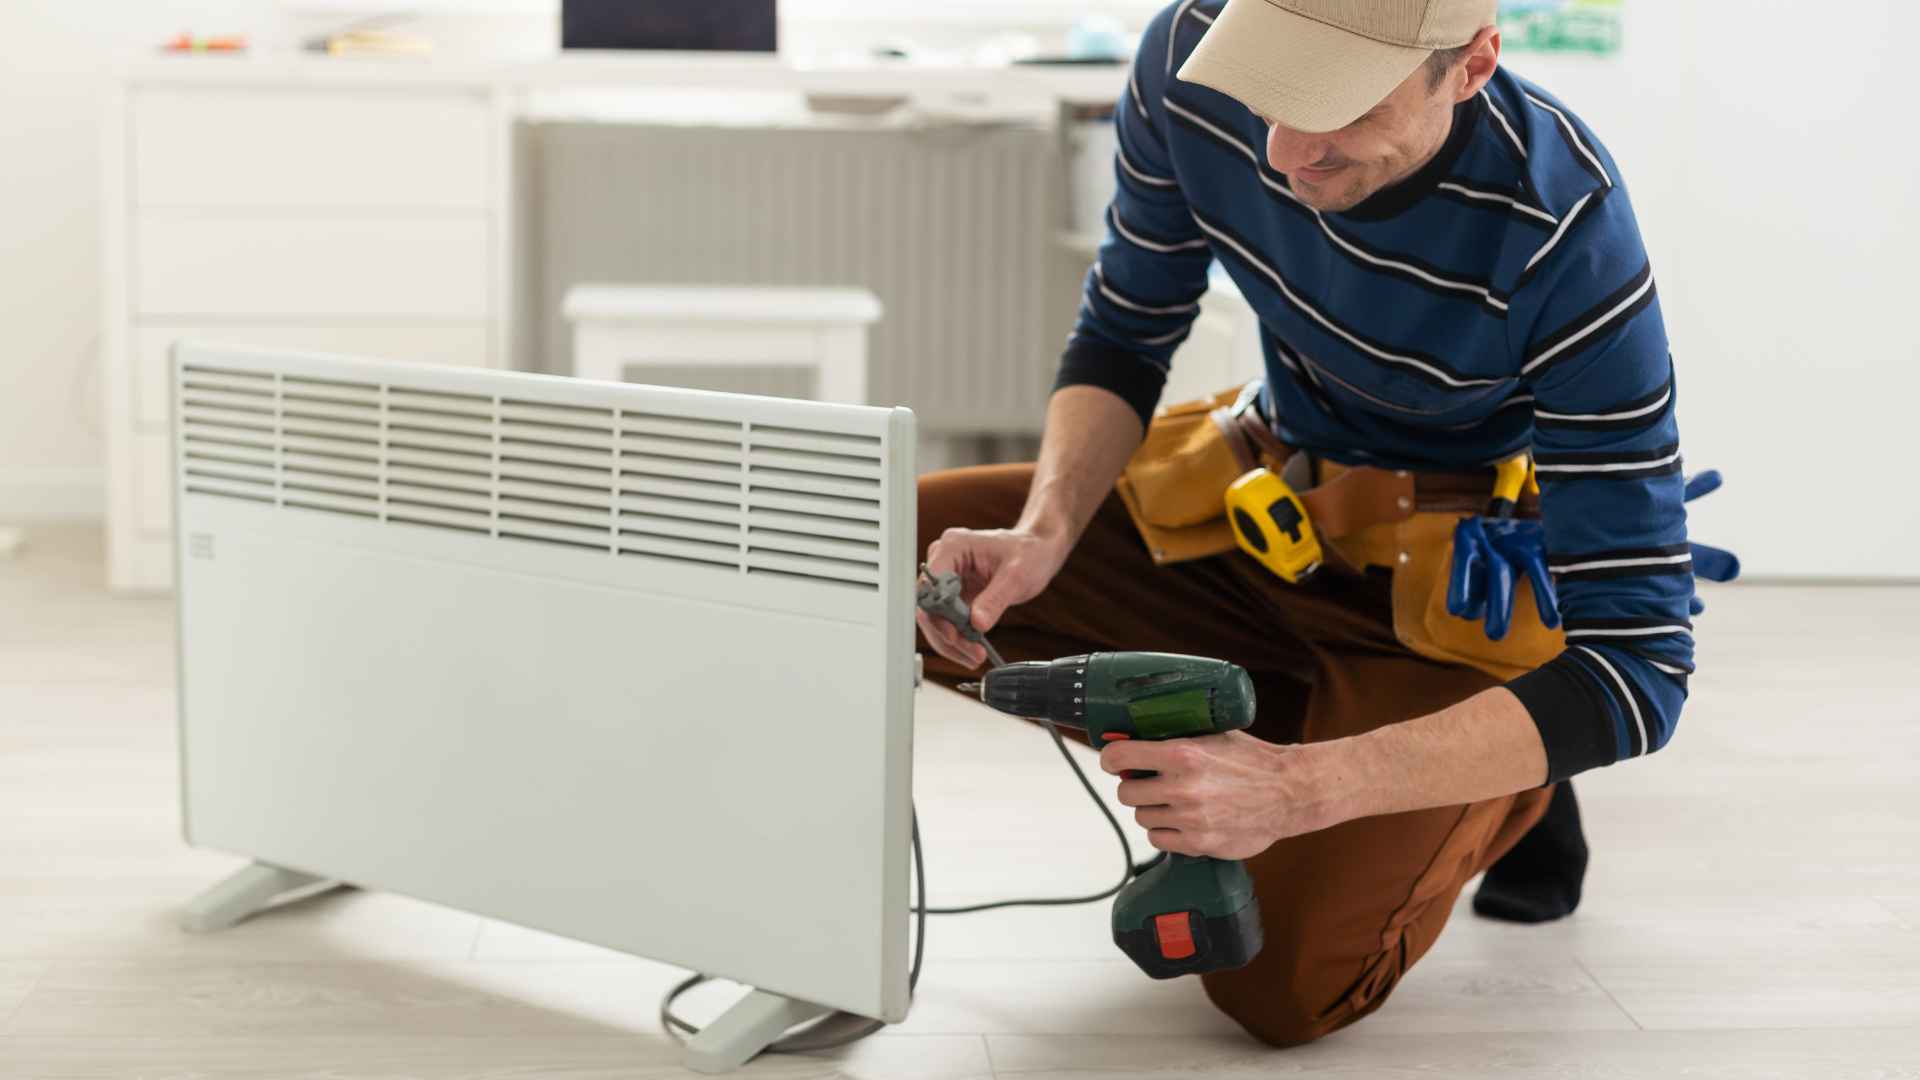 A technician in a striped shirt and cap repairs a white radiator with a cordless drill, attending to the gas line in a bright room.